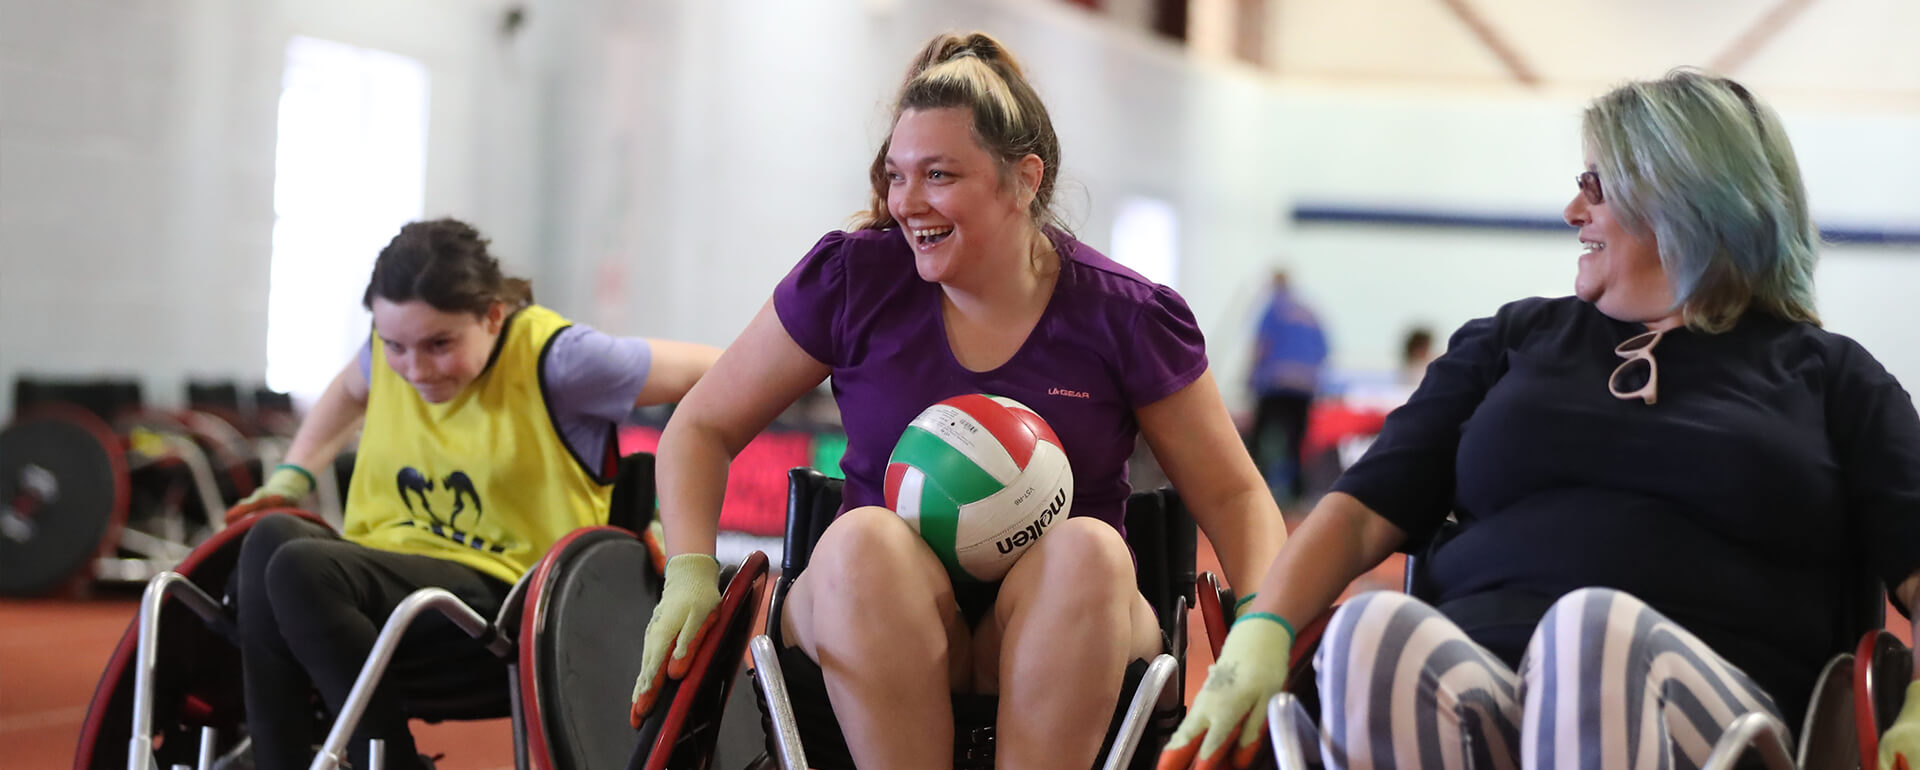 Three female-presenting participants play wheelchair rugby at insport Series: Para Sport Festival. The central participant has the ball in their lap, and gloved hands on both wheels of her sports wheelchair. She is smiling broadly, possibly laughing.